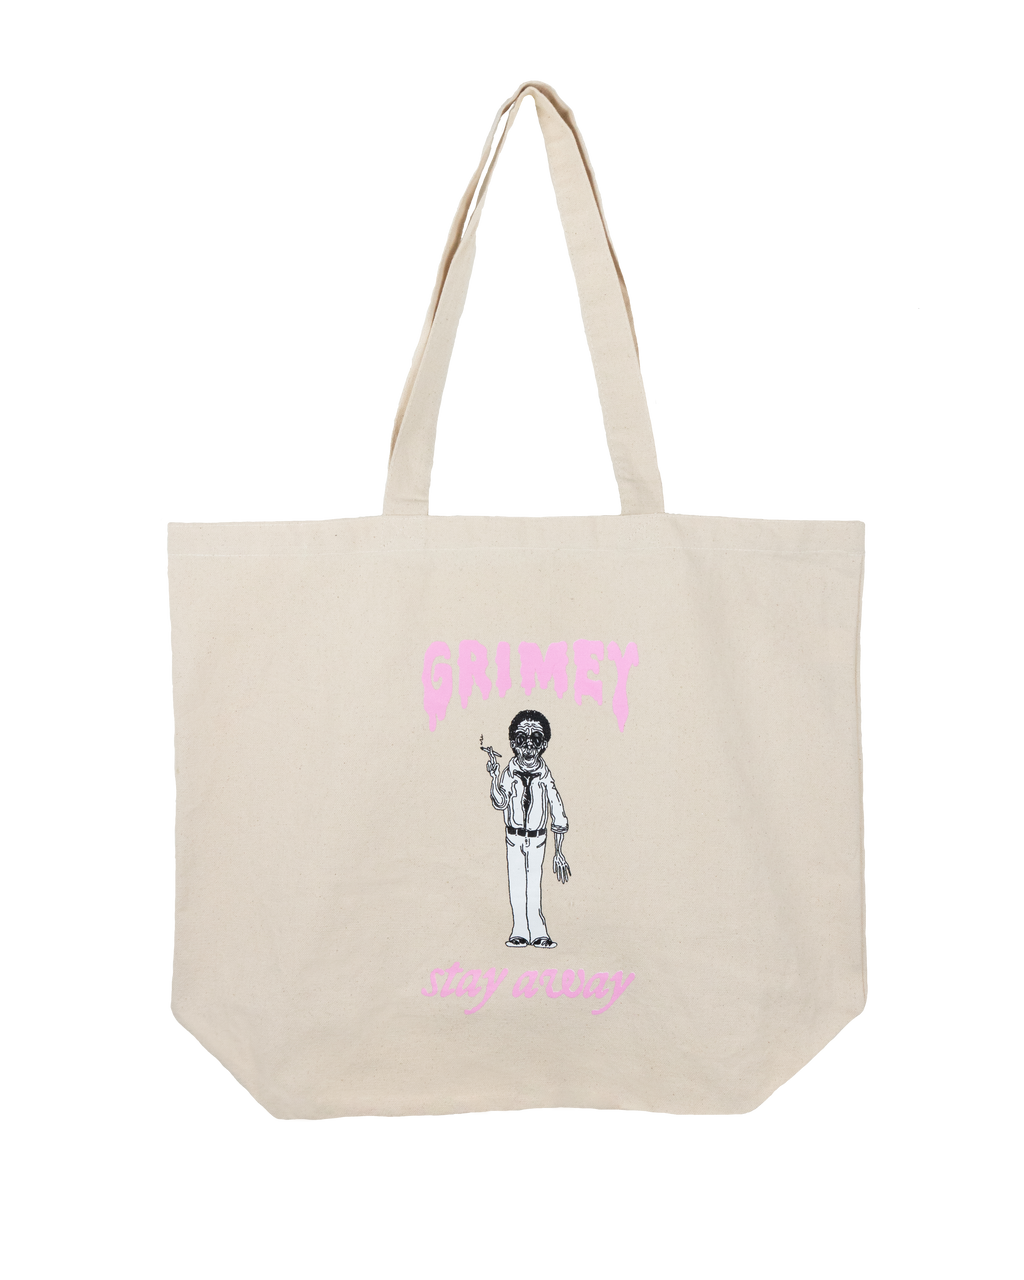 GRIMEY 'STAY AWAY' TOTE BAG